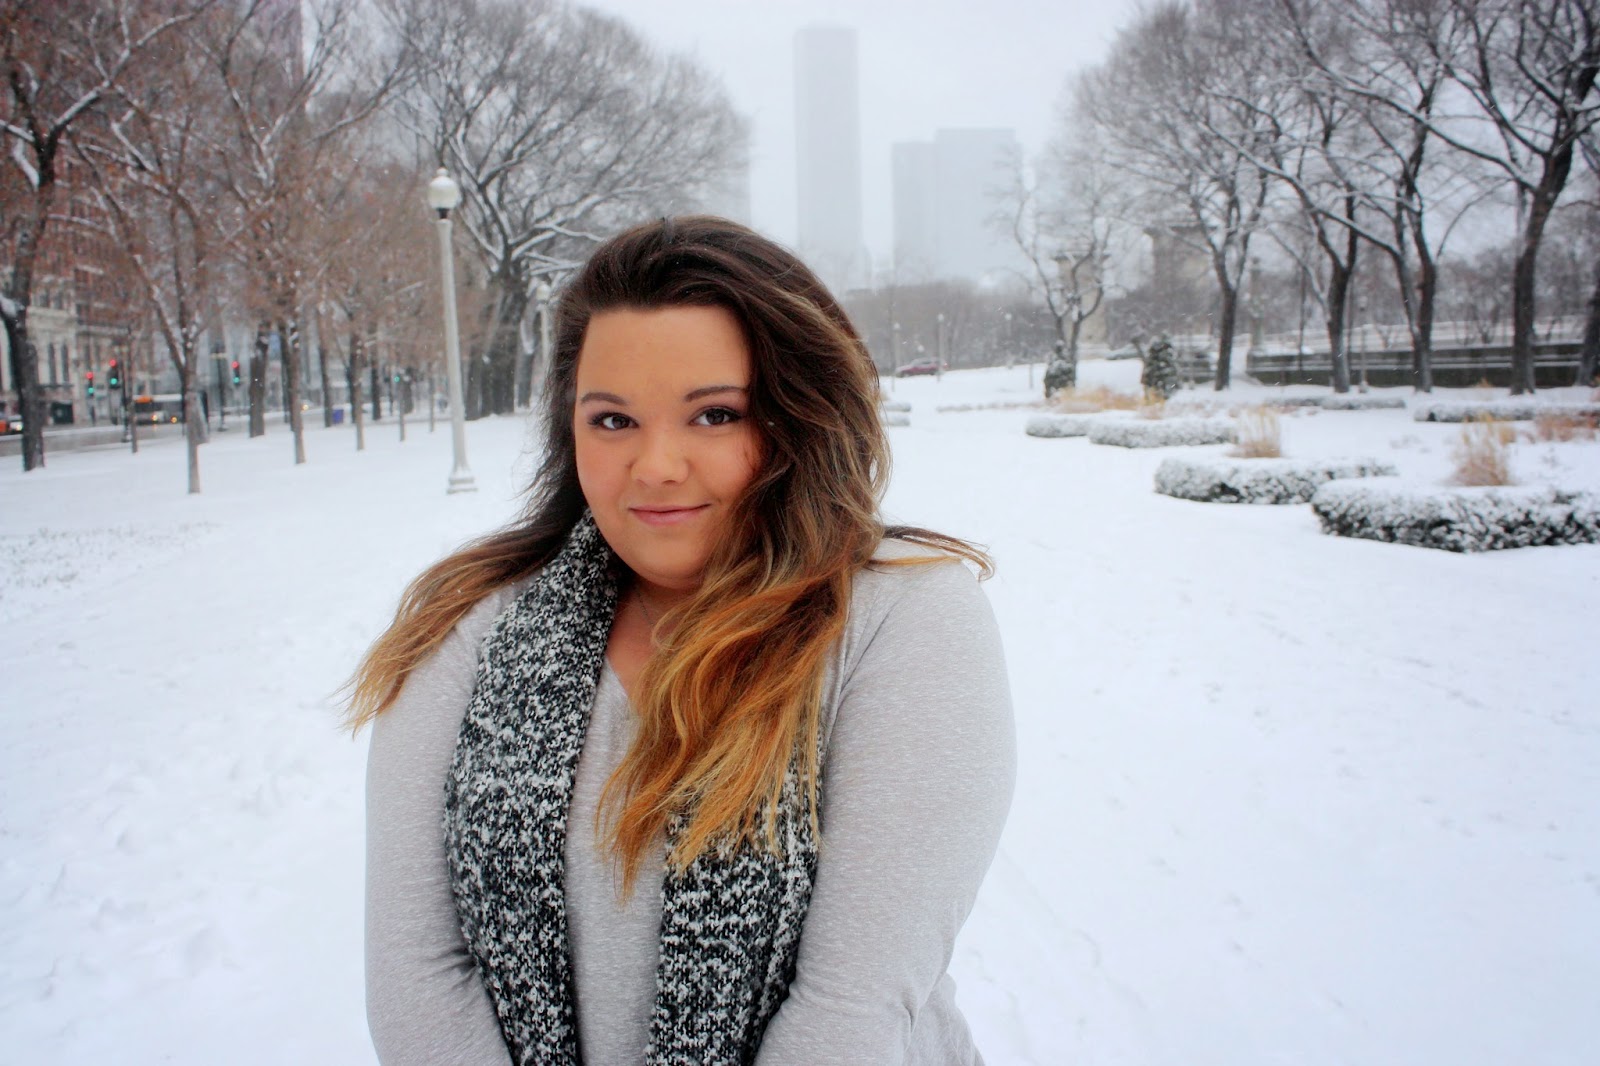 Natalie Craig, chicago, natalie in the city, plus size fashion blogger, curvy girls, fatshion, winter fashion 2015, what to wear, ootd, winter whites, snow day, what to wear snow, bbw, scarves, DIY destroyed denim, white denim, how to cut denim, ombre, thicks girls, knee high socks, how to wear a scarf, Forever 21, shopcade, chicago bloggers network, grant park